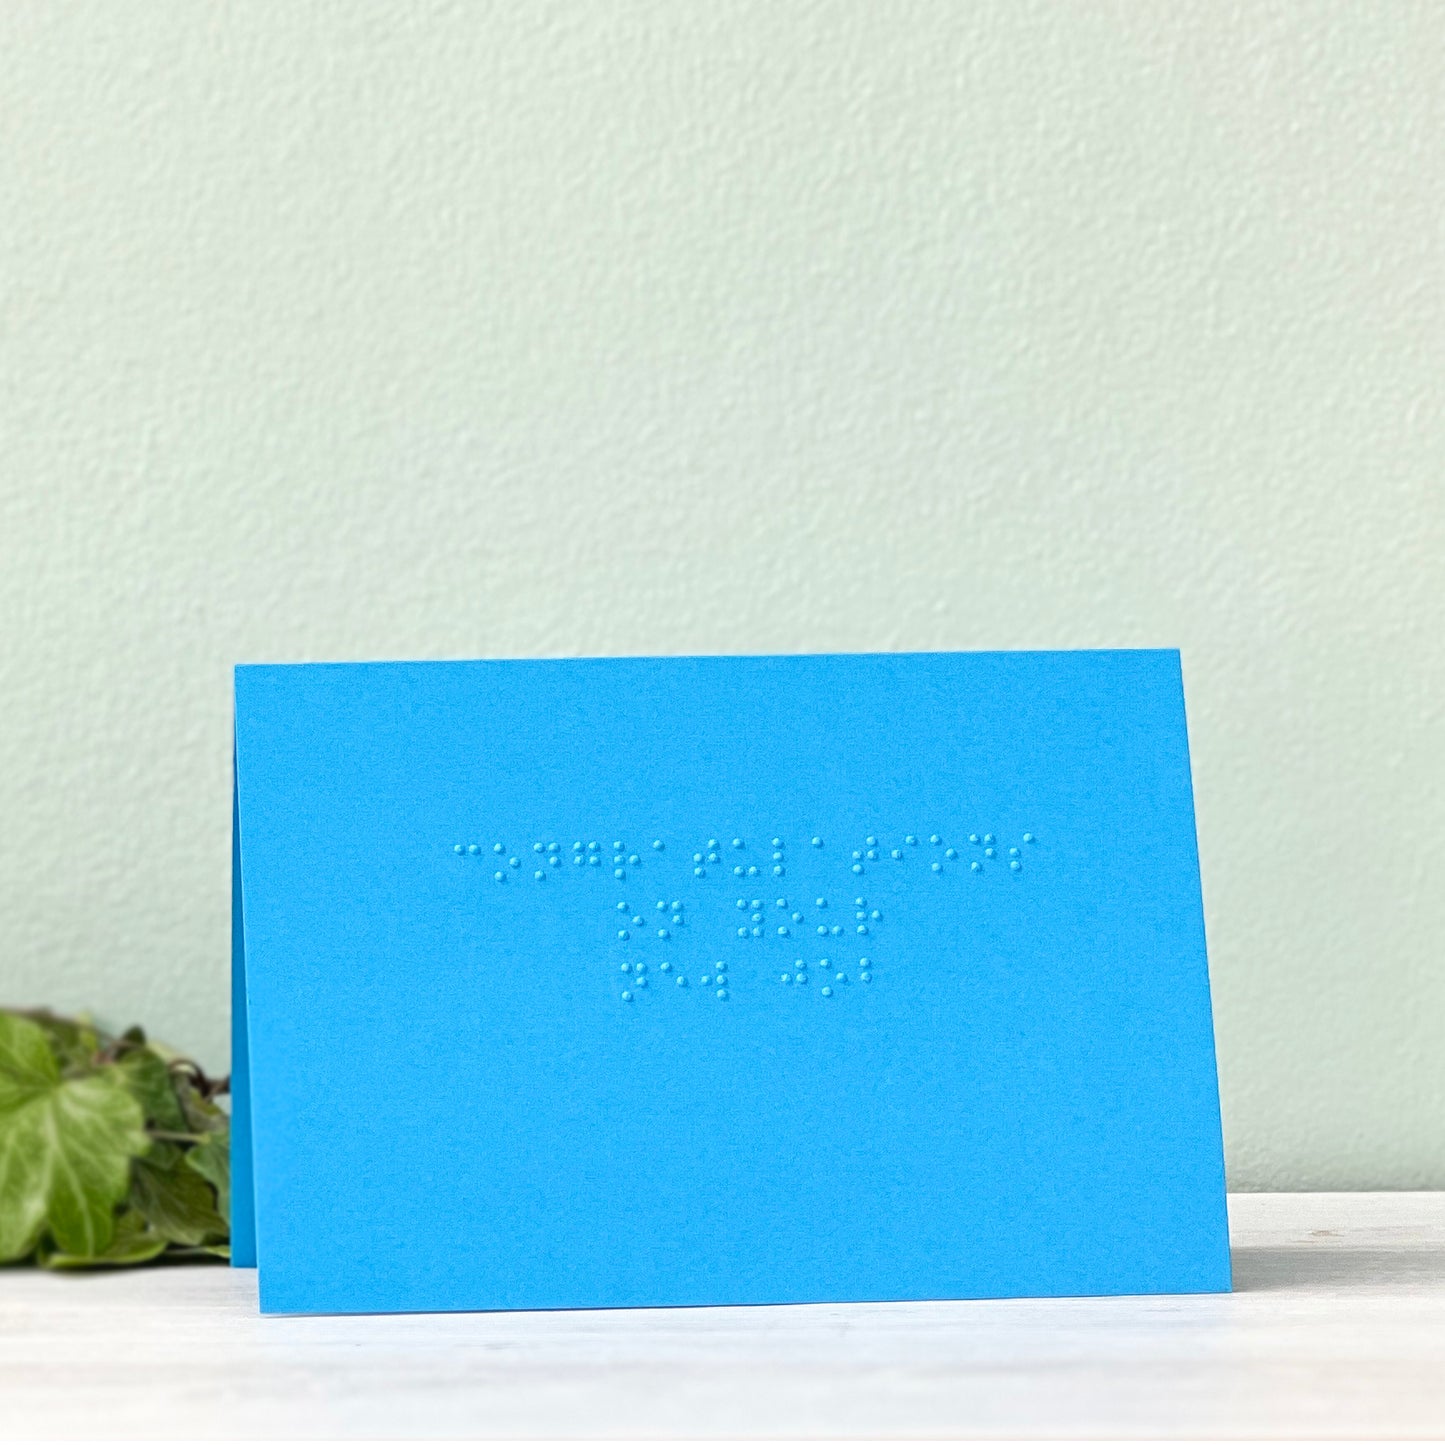 A vibrant blue card with "congratulations on your new job" written in lower case braille. There is foliage to the left of the card.